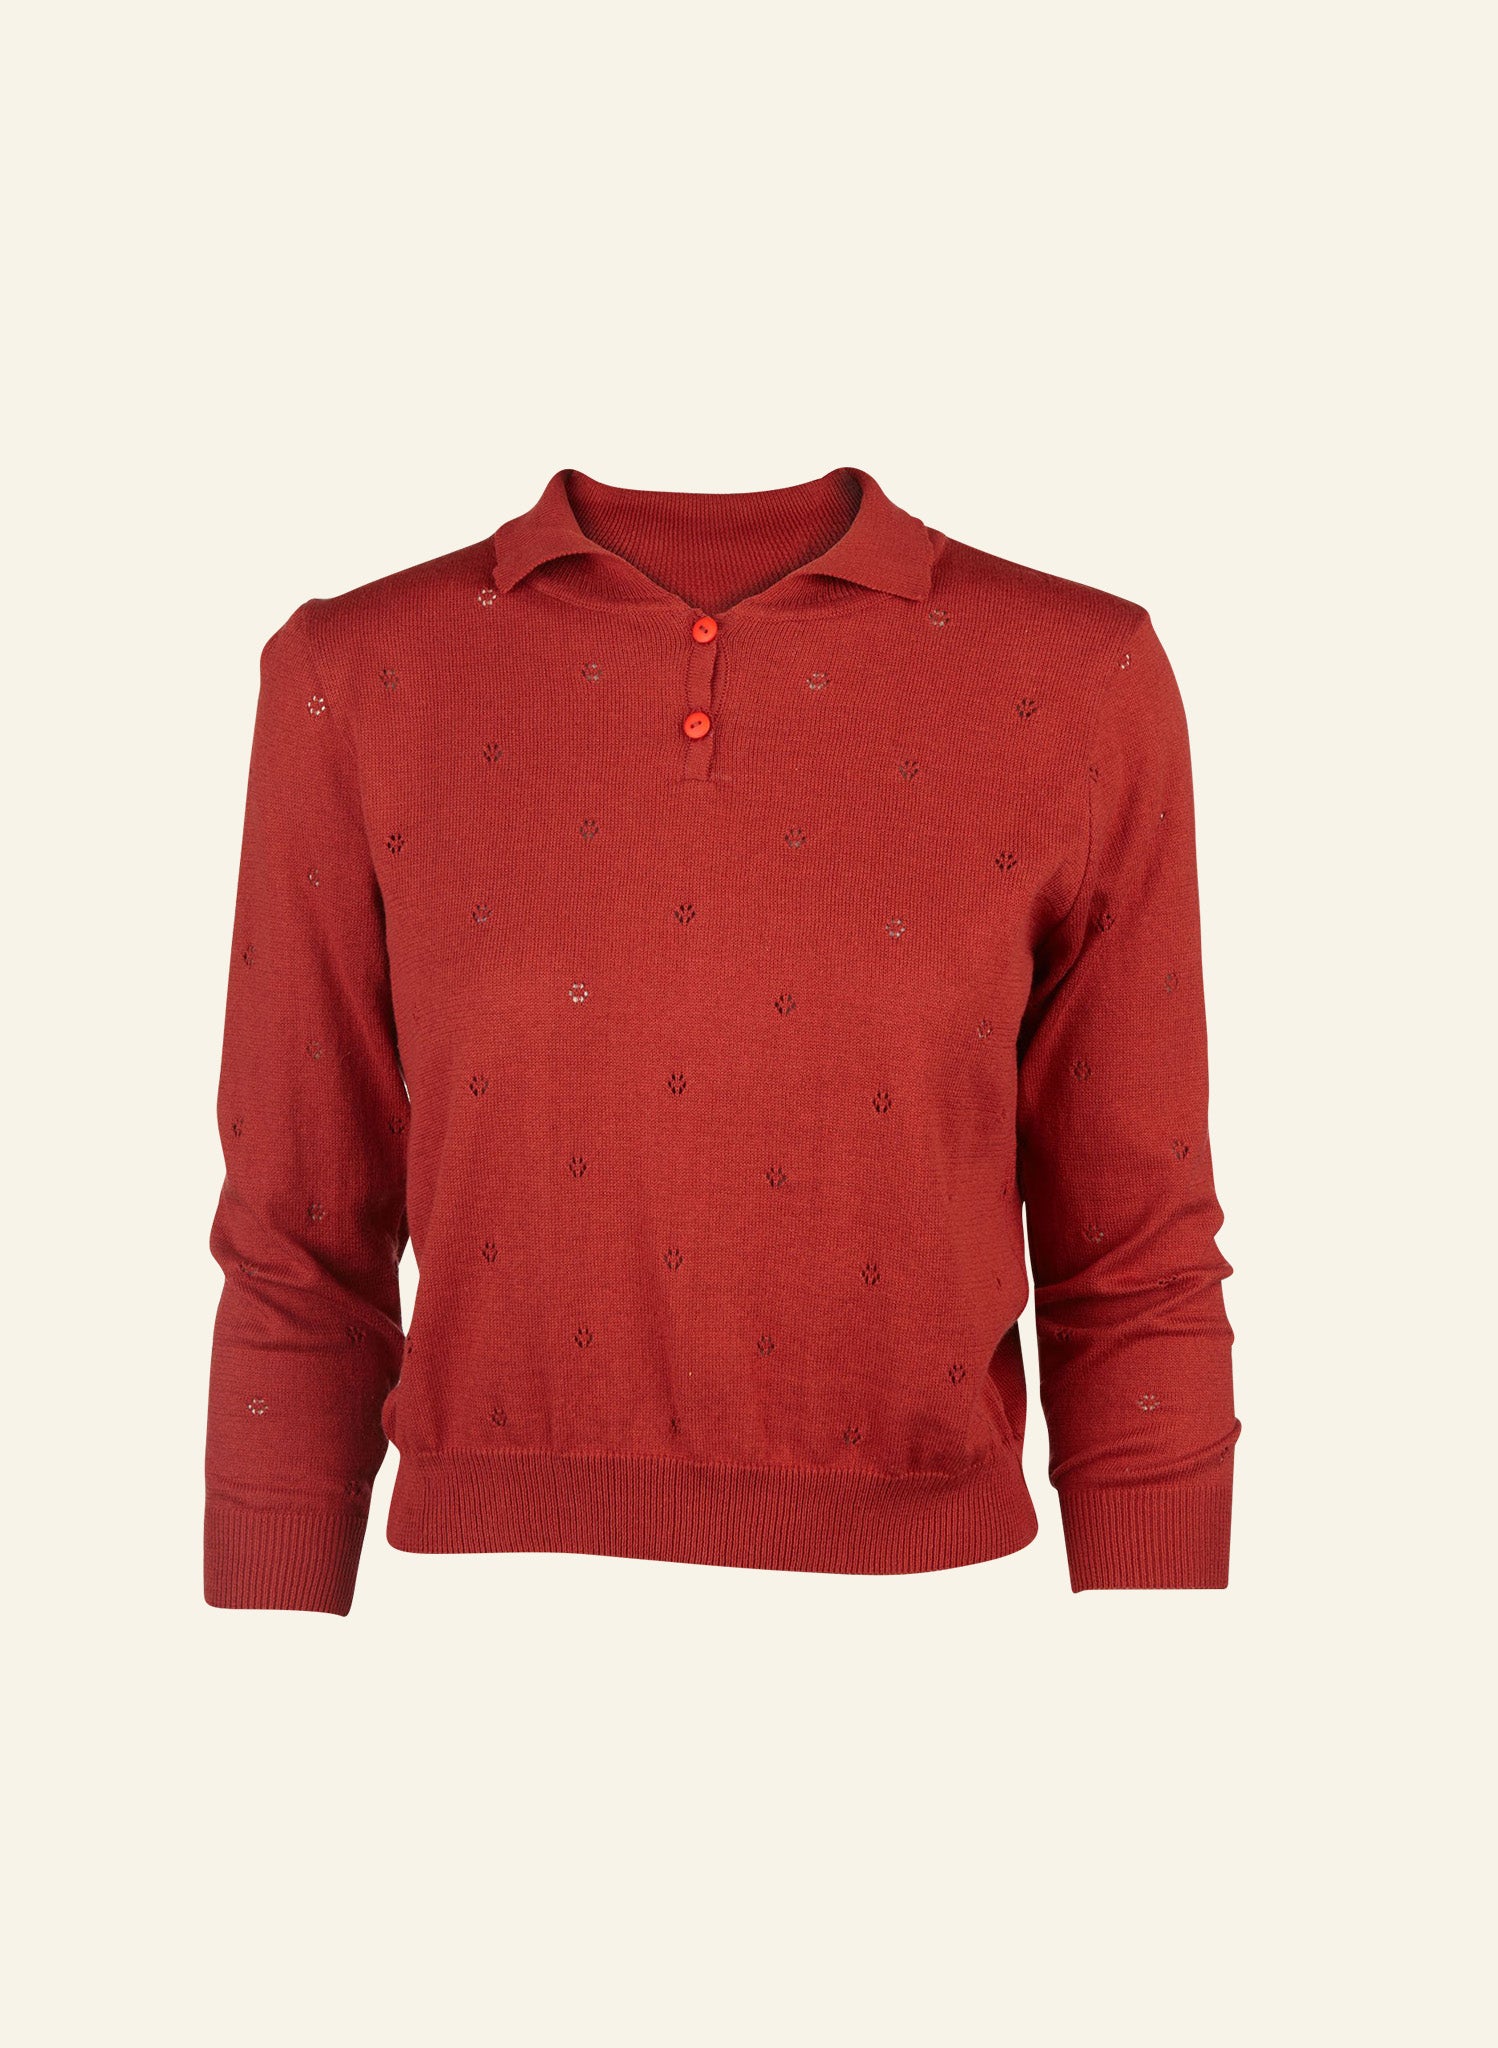 Aila Knitted Top - Rust Red